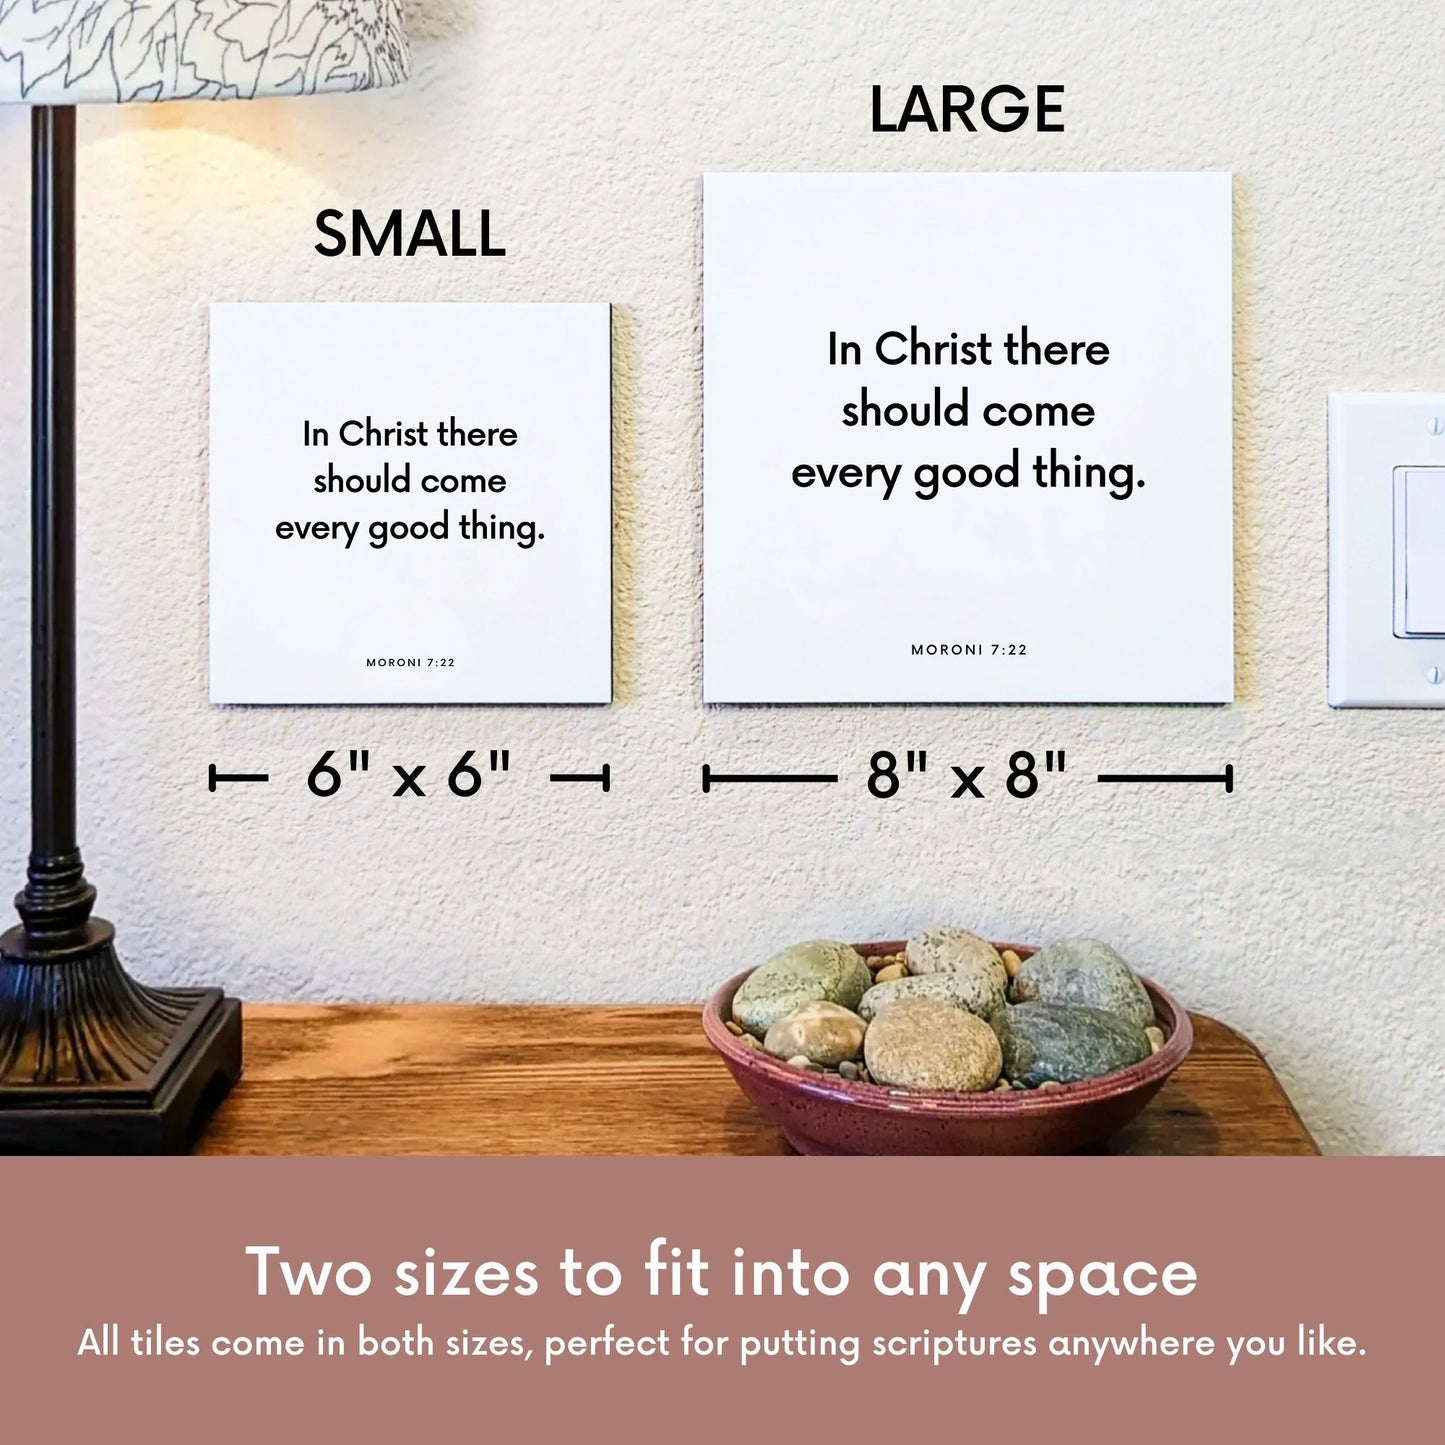 Scripture tile size comparison for Moroni 7:22 - "In Christ there should come every good thing"